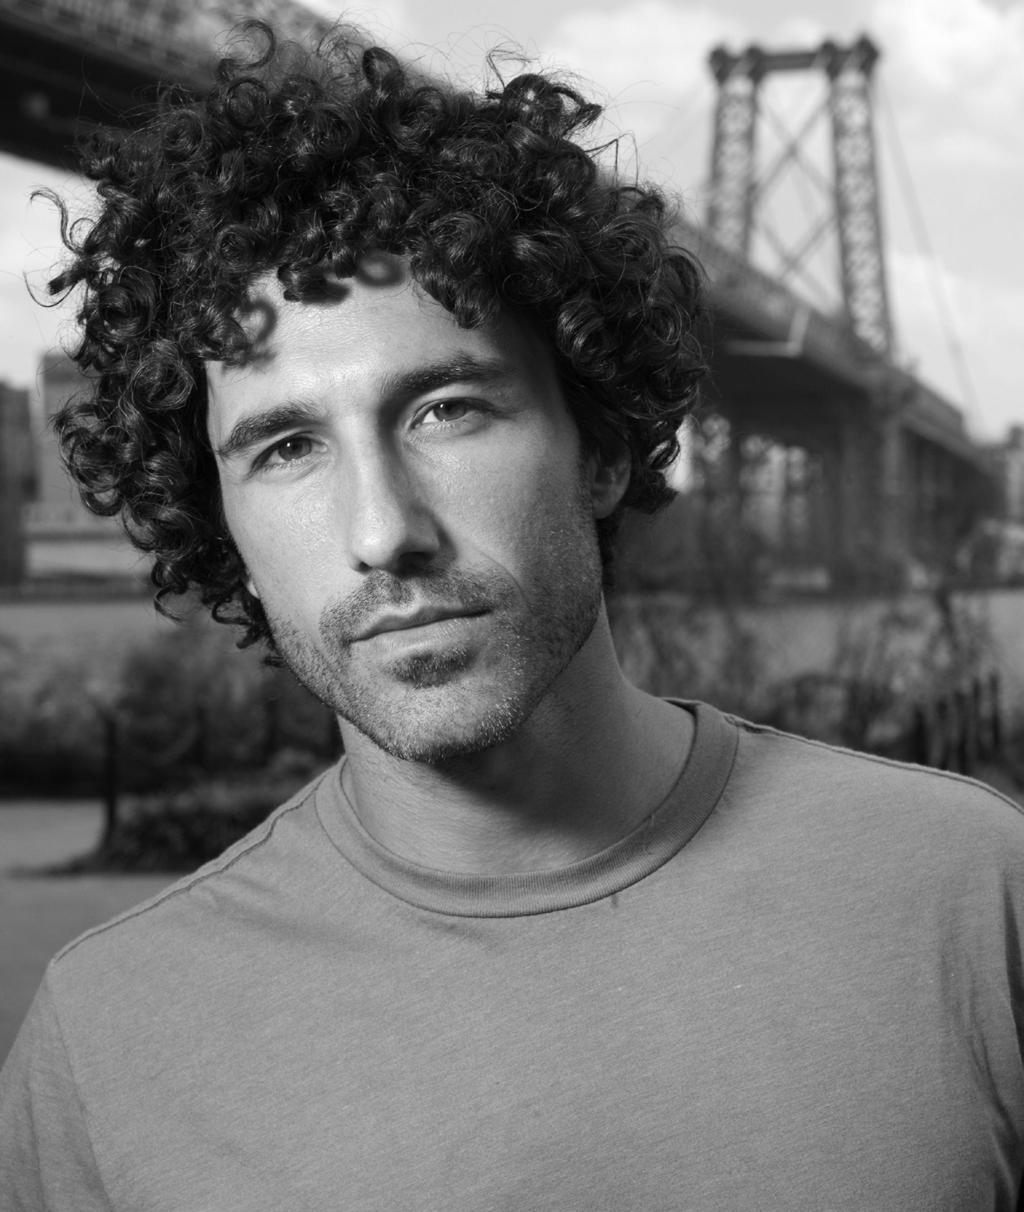 ETHAN ZOHN is a former professional soccer player, cancer survivor, winner of the hit reality television show Survivor Africa and co-founder of Grassroot Soccer.